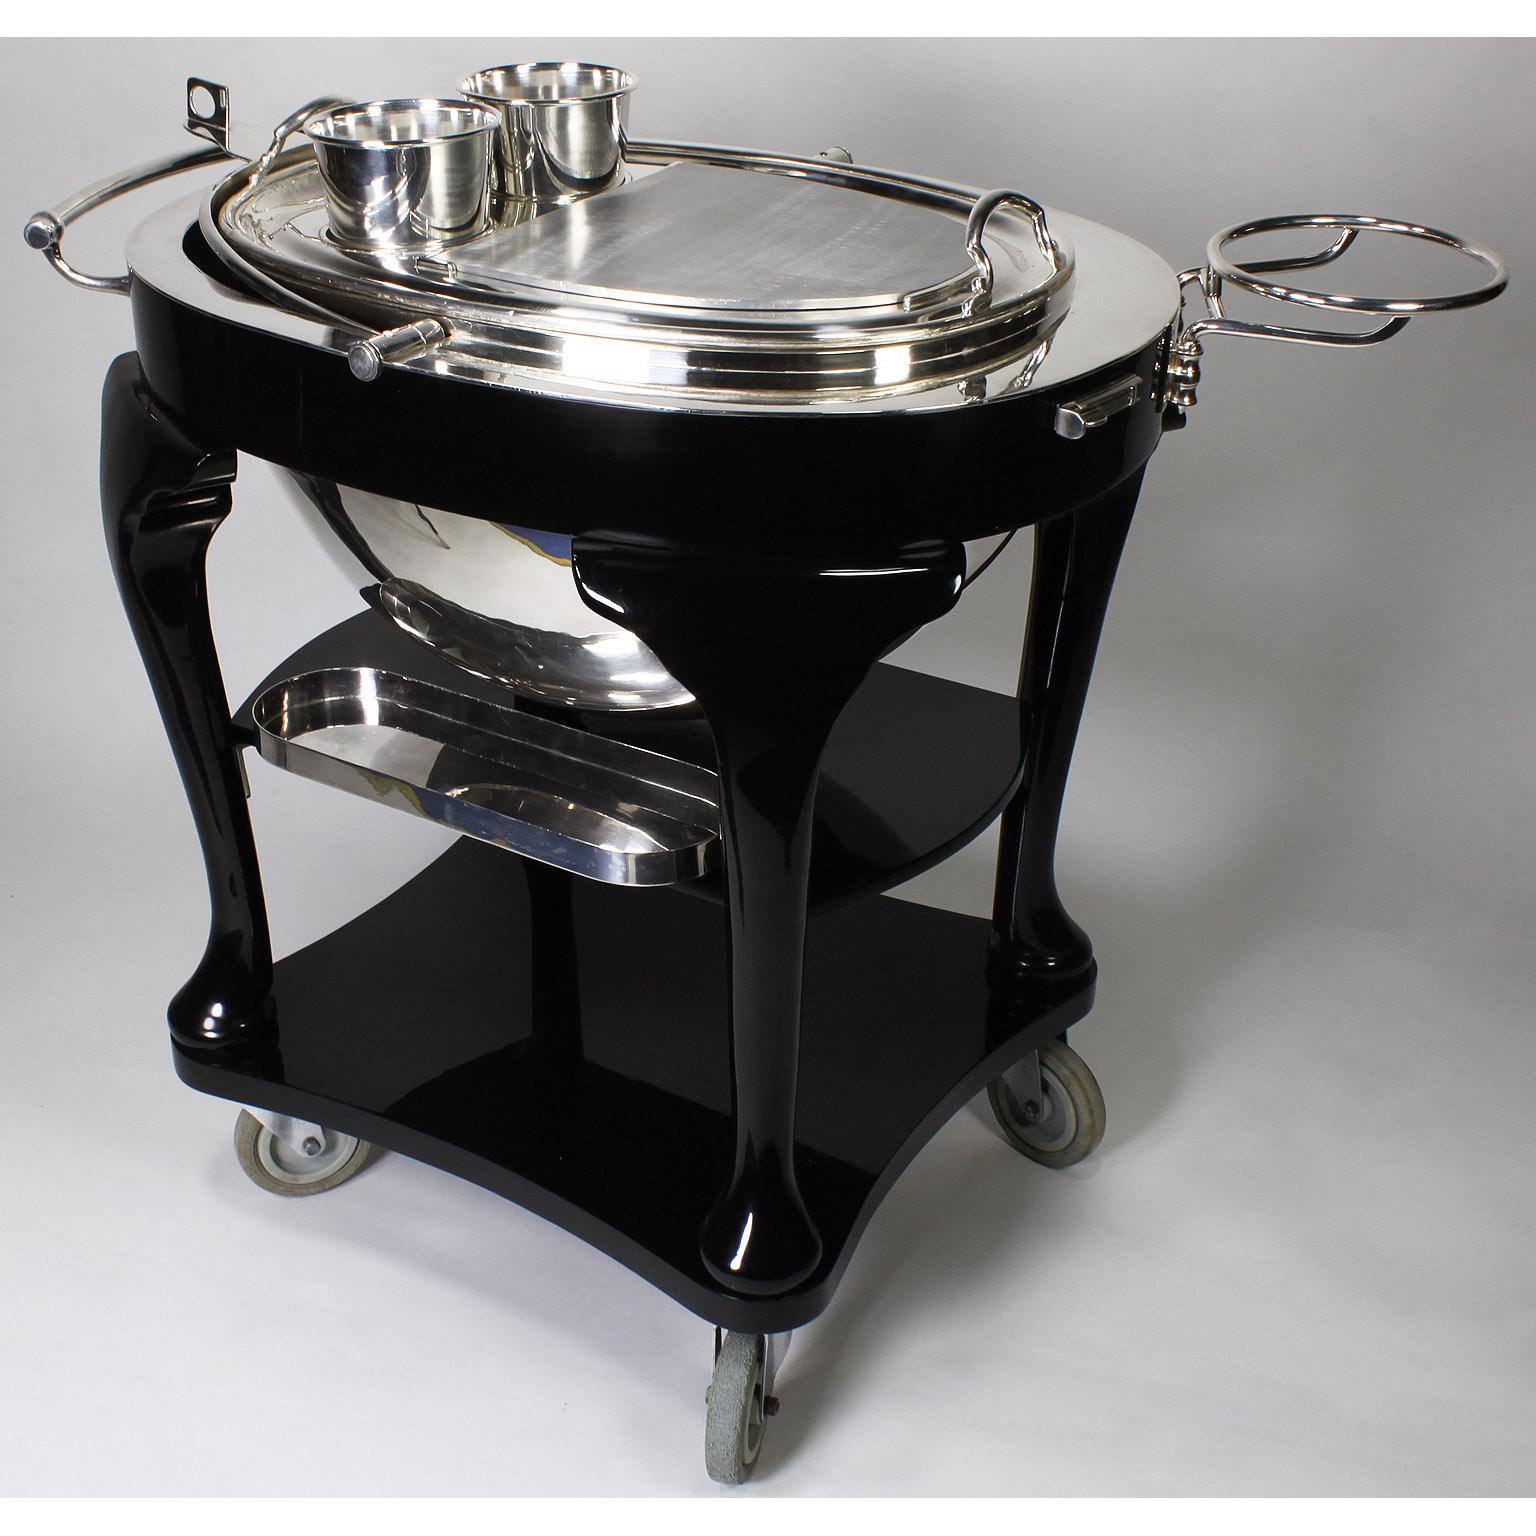 English 1930s Art Deco Ebonized & Silver Plated Beef/Turkey/Lamb Carving Trolley In Fair Condition For Sale In Los Angeles, CA